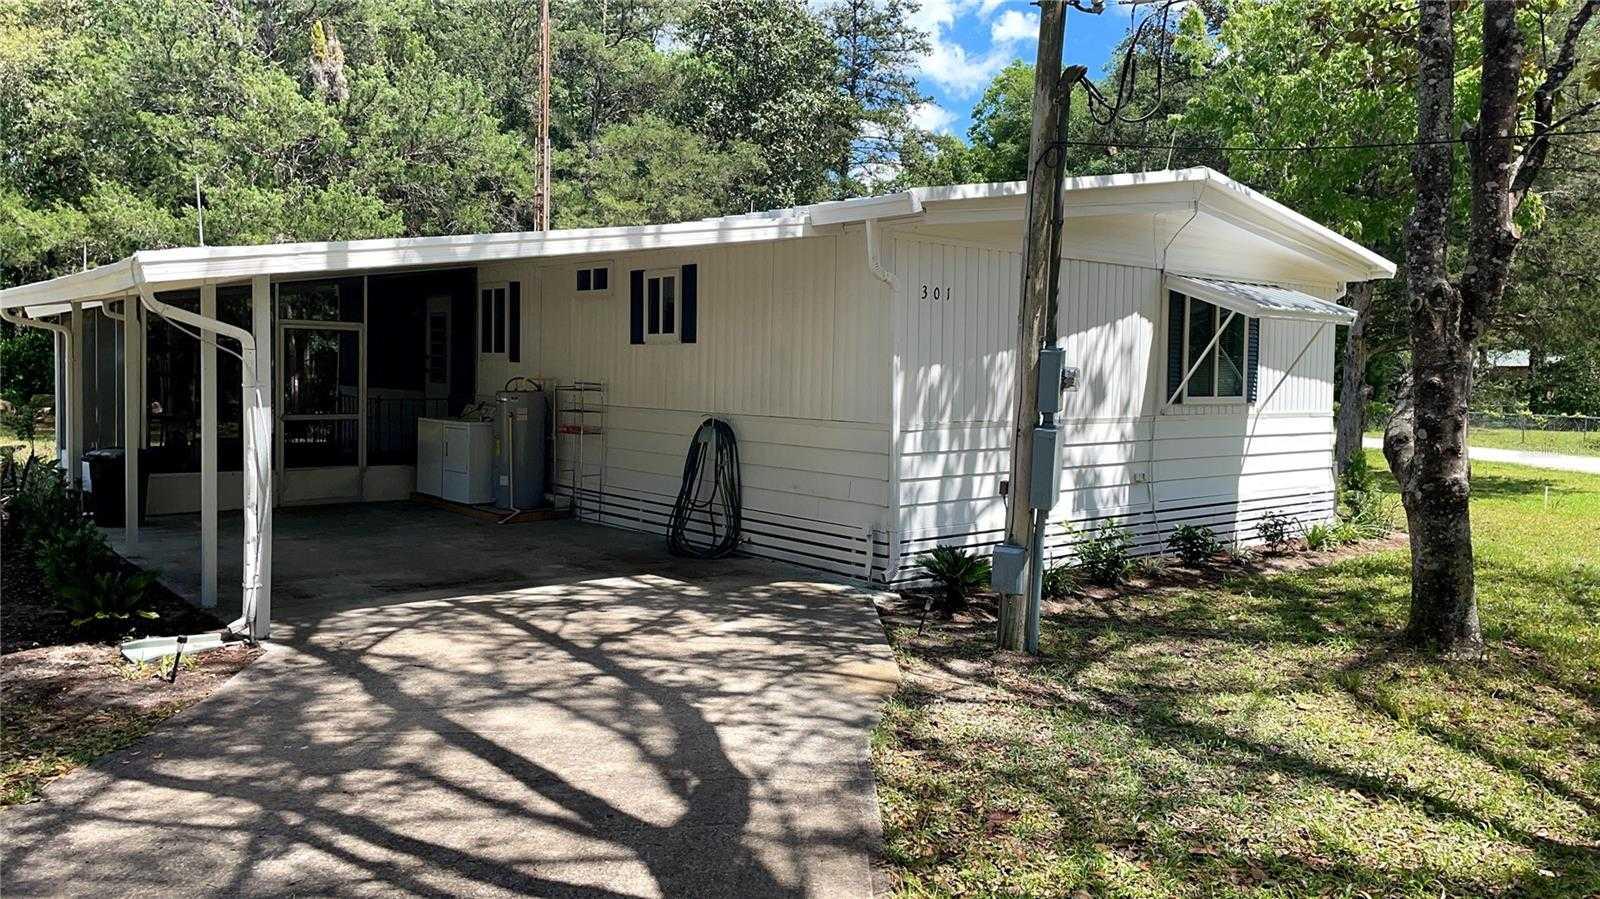 301 156TH, OCALA, Mobile Home - Pre 1976,  for sale, Natalie Amento, PA, Florida Realty Investments